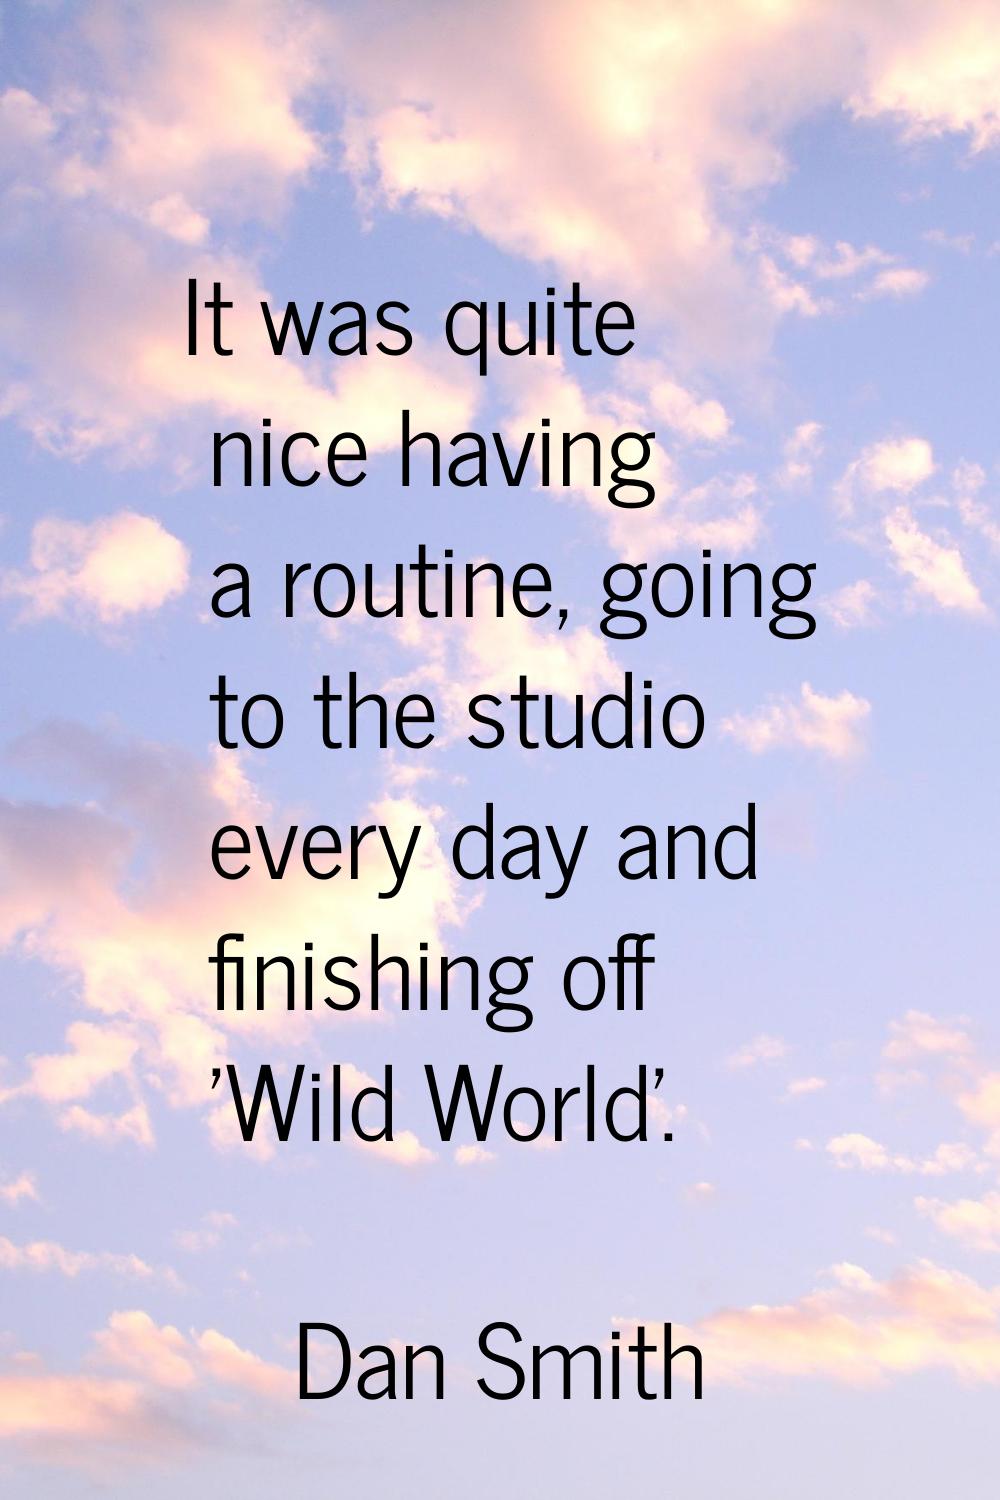 It was quite nice having a routine, going to the studio every day and finishing off 'Wild World'.